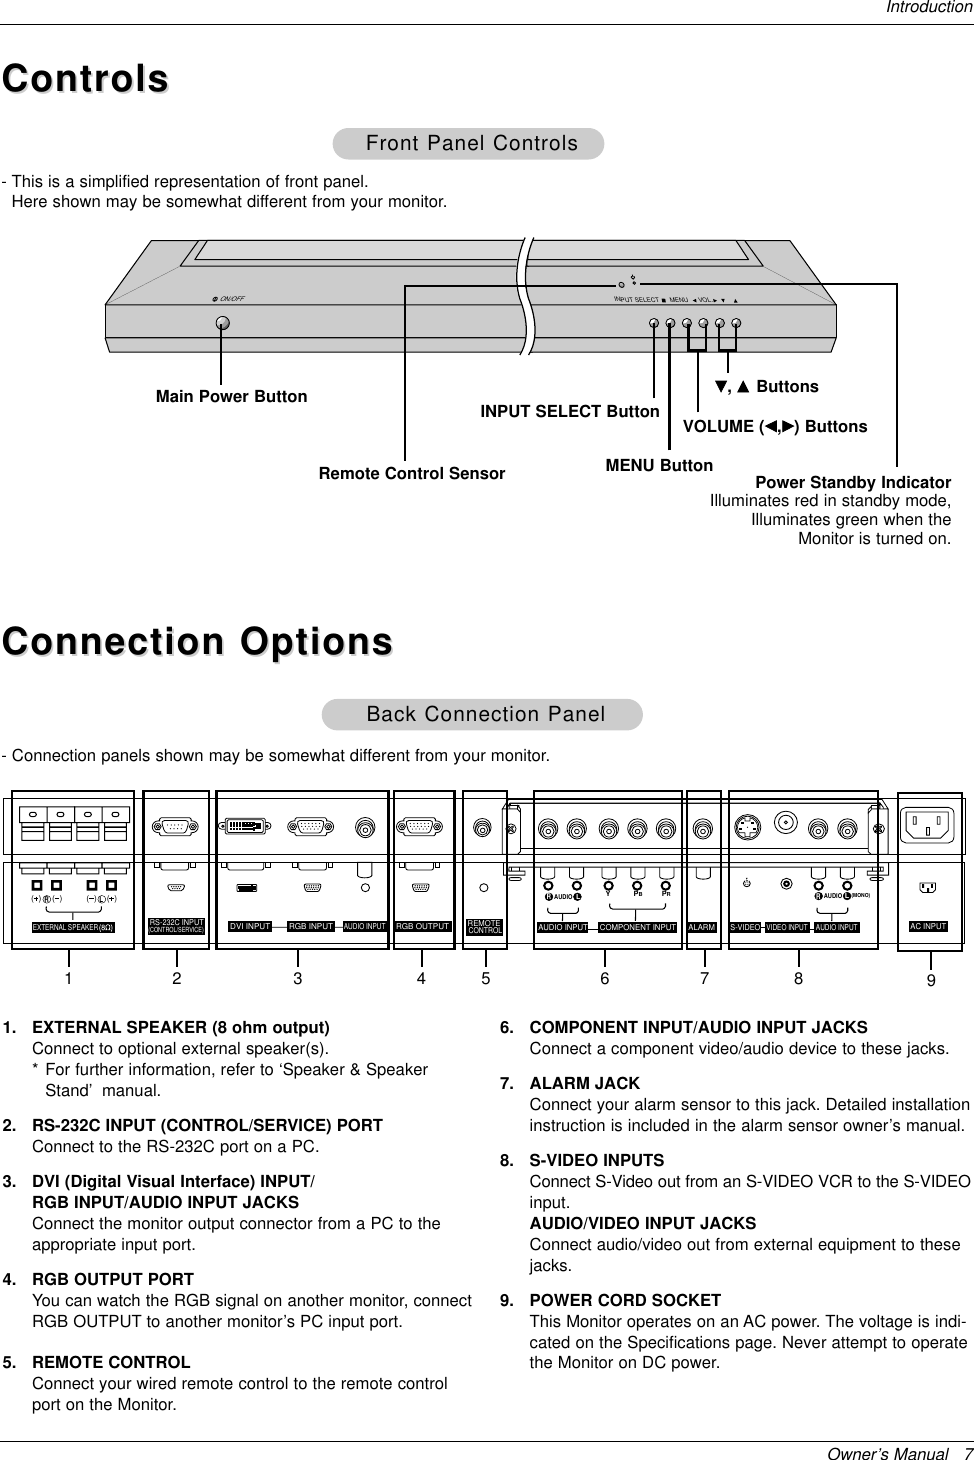 Owner’s Manual   7IntroductionControlsControlsConnection OptionsConnection OptionsR(  )(  )(  )(  )LRS-232C INPUT(CONTROL/SERVICE)EXTERNAL SPEAKERAC INPUTAUDIO INPUTREMOTECONTROLDVI INPUT RGB INPUT RGB OUTPUTYPBPR(MONO)RAUDIOLRAUDIOLS-VIDEOAUDIO INPUTVIDEO INPUTAUDIO INPUT ALARMCOMPONENT INPUT11. EXTERNAL SPEAKER (8 ohm output)Connect to optional external speaker(s).* For further information, refer to ‘Speaker &amp; SpeakerStand’manual.2. RS-232C INPUT (CONTROL/SERVICE) PORTConnect to the RS-232C port on a PC.3. DVI (Digital Visual Interface) INPUT/RGB INPUT/AUDIO INPUT JACKSConnect the monitor output connector from a PC to theappropriate input port.4. RGB OUTPUT PORTYou can watch the RGB signal on another monitor, connectRGB OUTPUT to another monitor’s PC input port.5. REMOTE CONTROLConnect your wired remote control to the remote controlport on the Monitor.6. COMPONENT INPUT/AUDIO INPUT JACKSConnect a component video/audio device to these jacks.7. ALARM JACKConnect your alarm sensor to this jack. Detailed installationinstruction is included in the alarm sensor owner’s manual.8. S-VIDEO INPUTSConnect S-Video out from an S-VIDEO VCR to the S-VIDEOinput.AUDIO/VIDEO INPUT JACKSConnect audio/video out from external equipment to thesejacks.9. POWER CORD SOCKETThis Monitor operates on an AC power. The voltage is indi-cated on the Specifications page. Never attempt to operatethe Monitor on DC power.Back Connection PanelBack Connection PanelVOL.MENUINPUT SELECTON/OFFMain Power Button INPUT SELECT Button VOLUME (F,G) ButtonsPower Standby IndicatorIlluminates red in standby mode,Illuminates green when theMonitor is turned on.Remote Control Sensor MENU ButtonE, D ButtonsFront Panel ControlsFront Panel Controls2 4 5 73 8 96- This is a simplified representation of front panel. Here shown may be somewhat different from your monitor.- Connection panels shown may be somewhat different from your monitor.